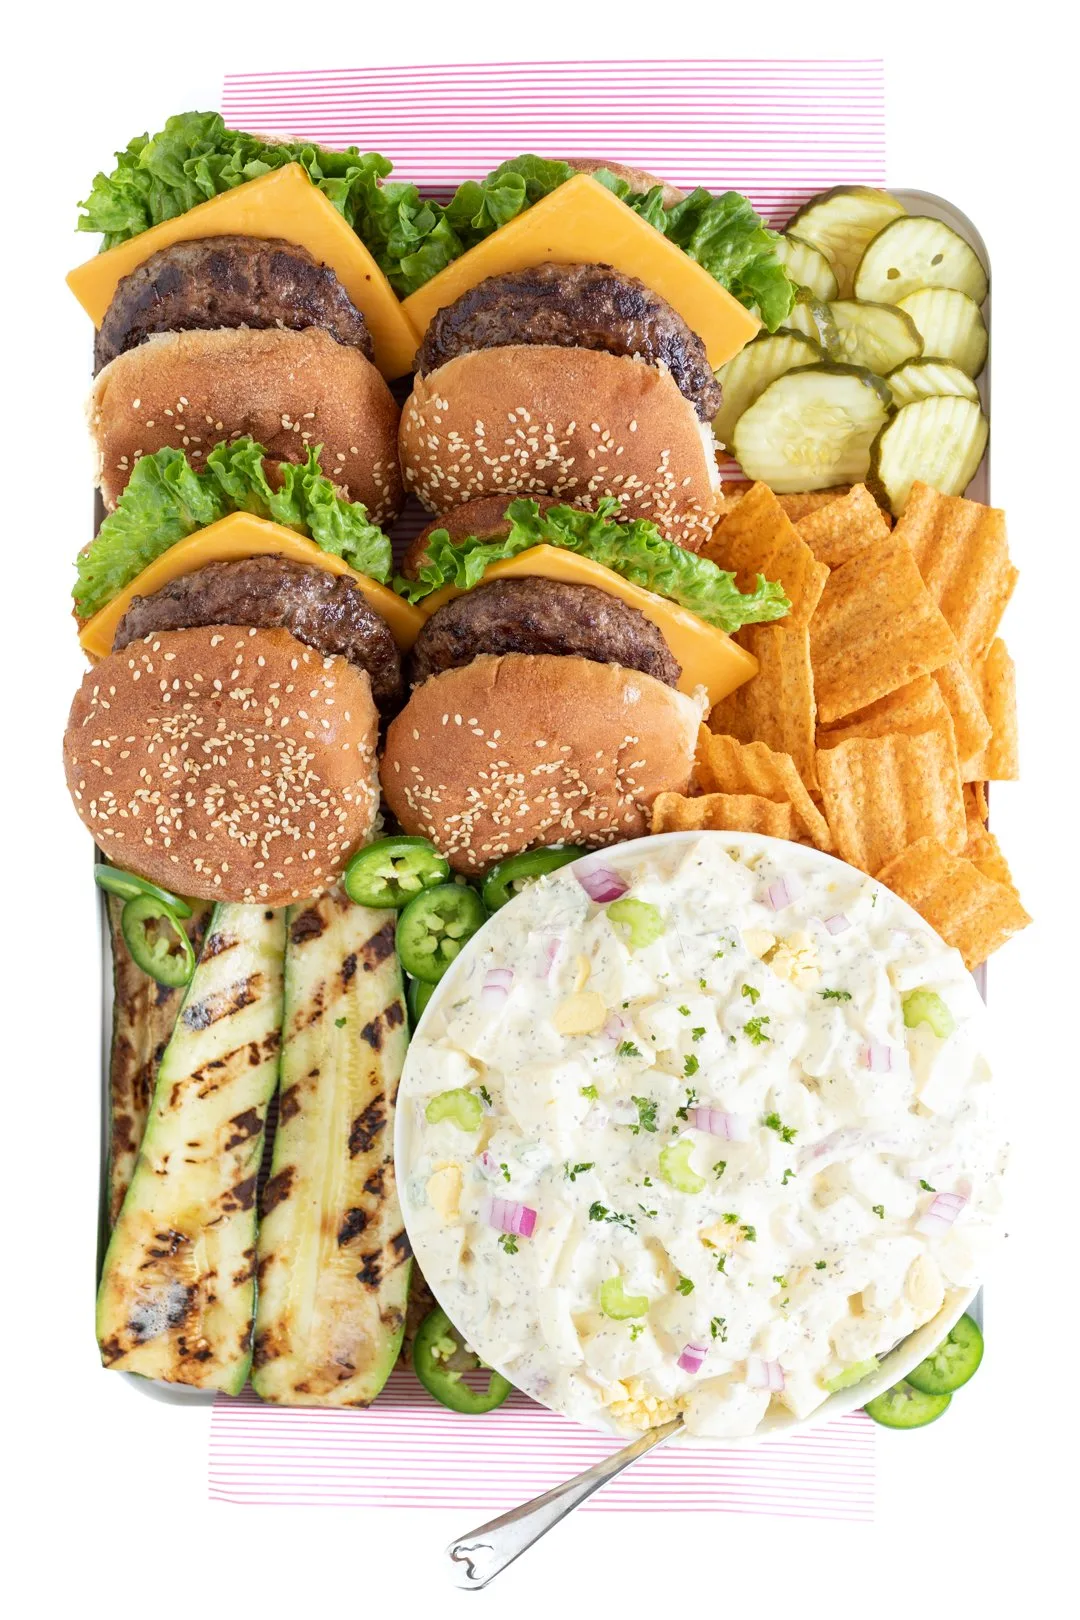 grilled burgers and traditional potato salad served on a tray